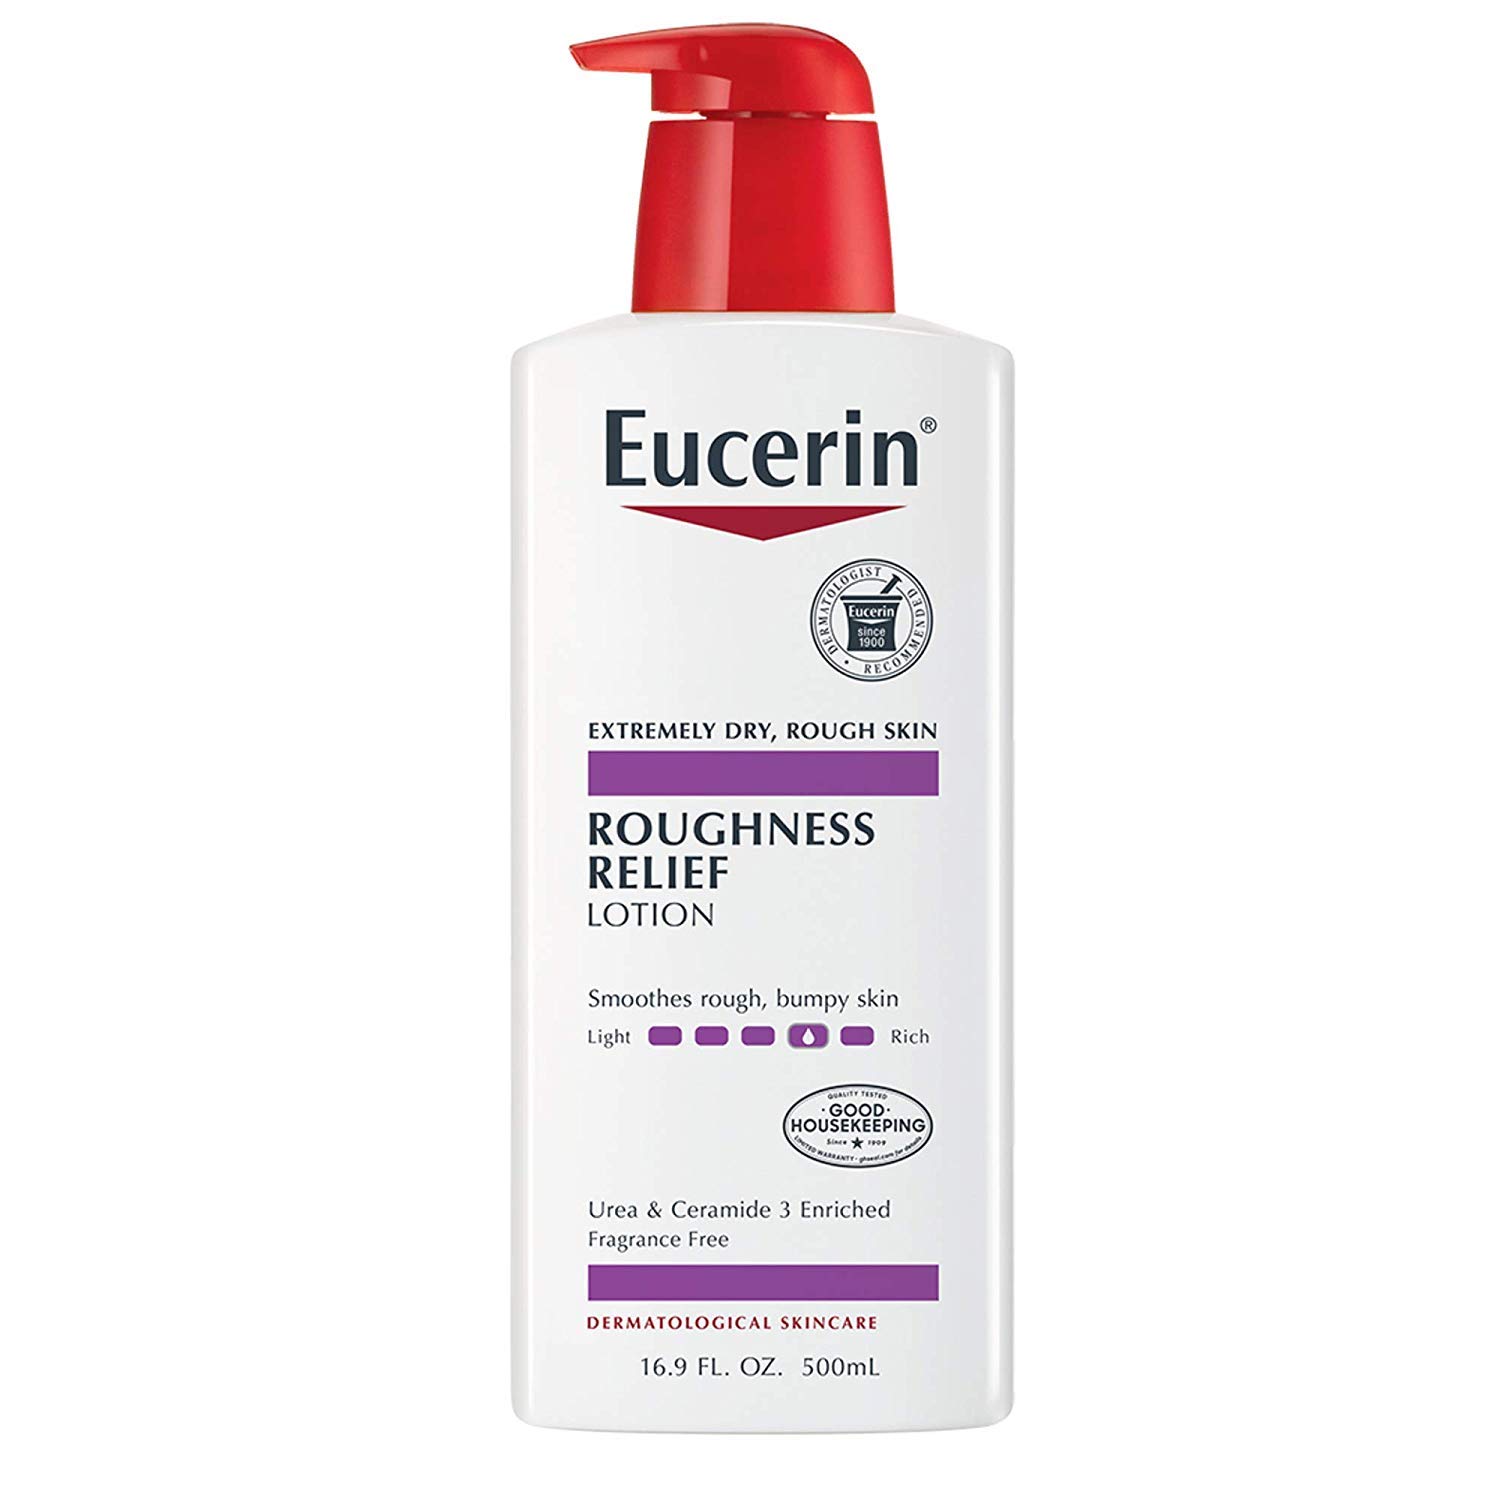 eucerin roughness relief lotion ingredients